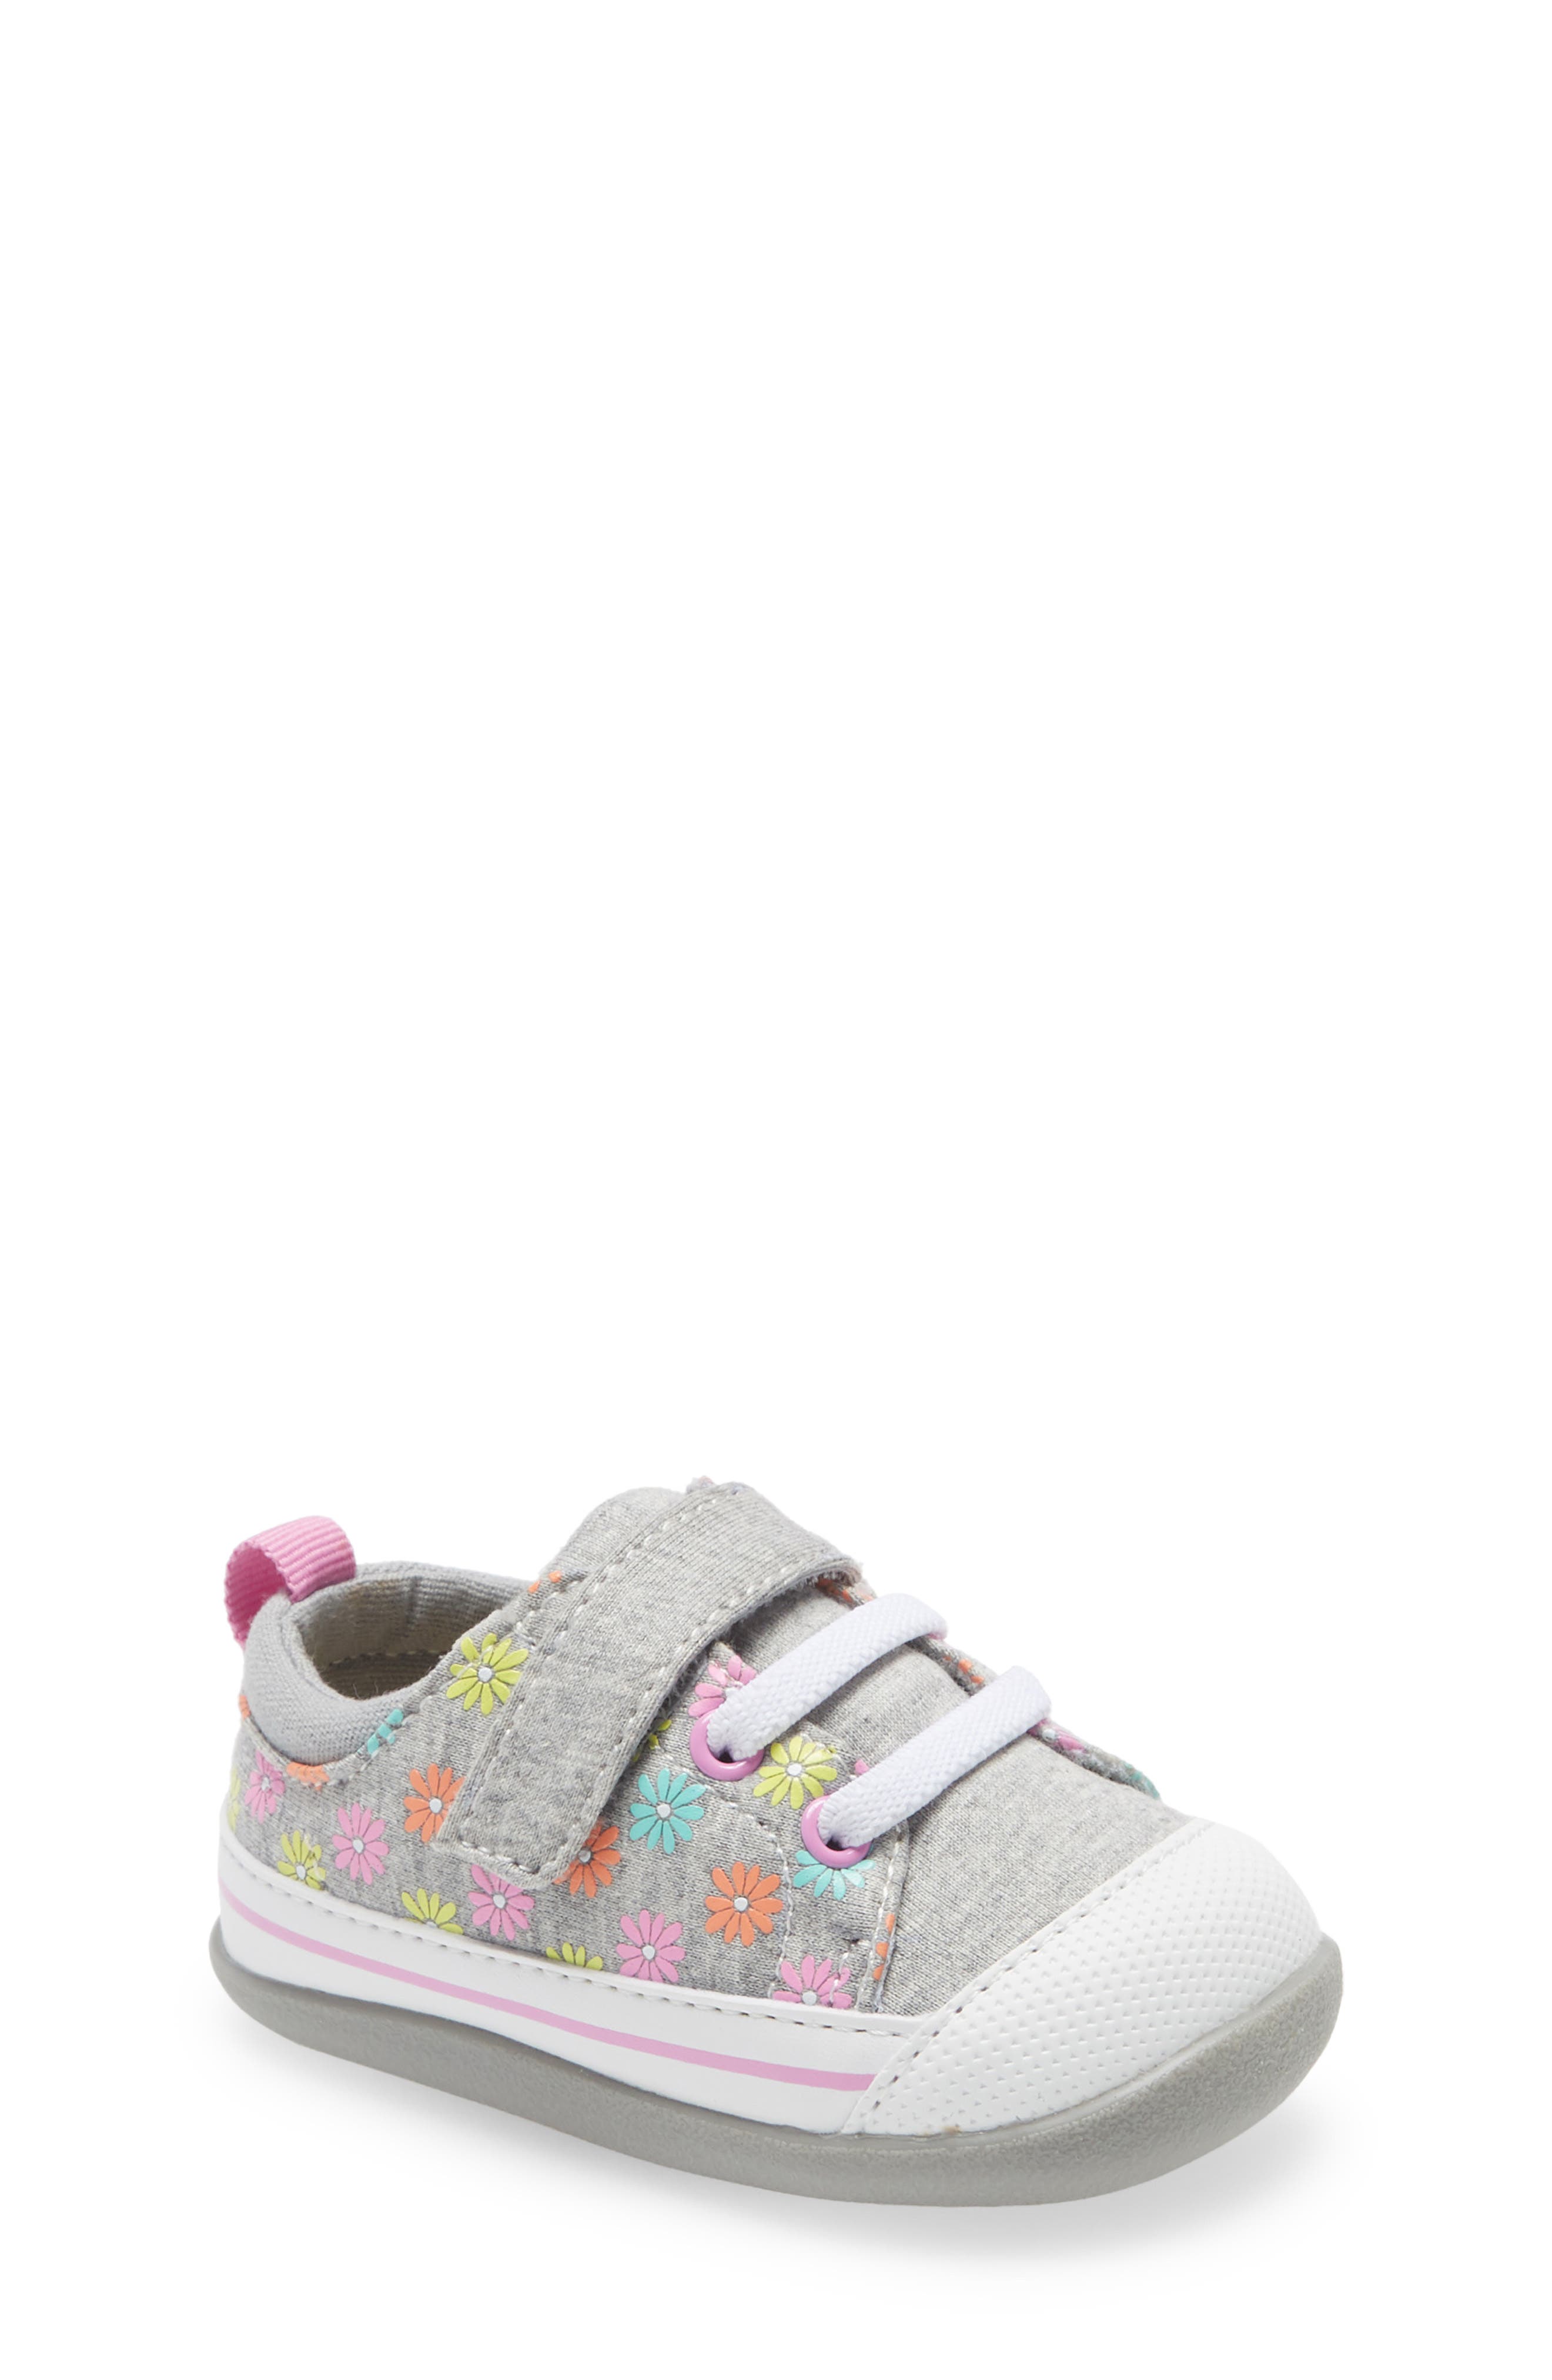 baby 1st walking shoes